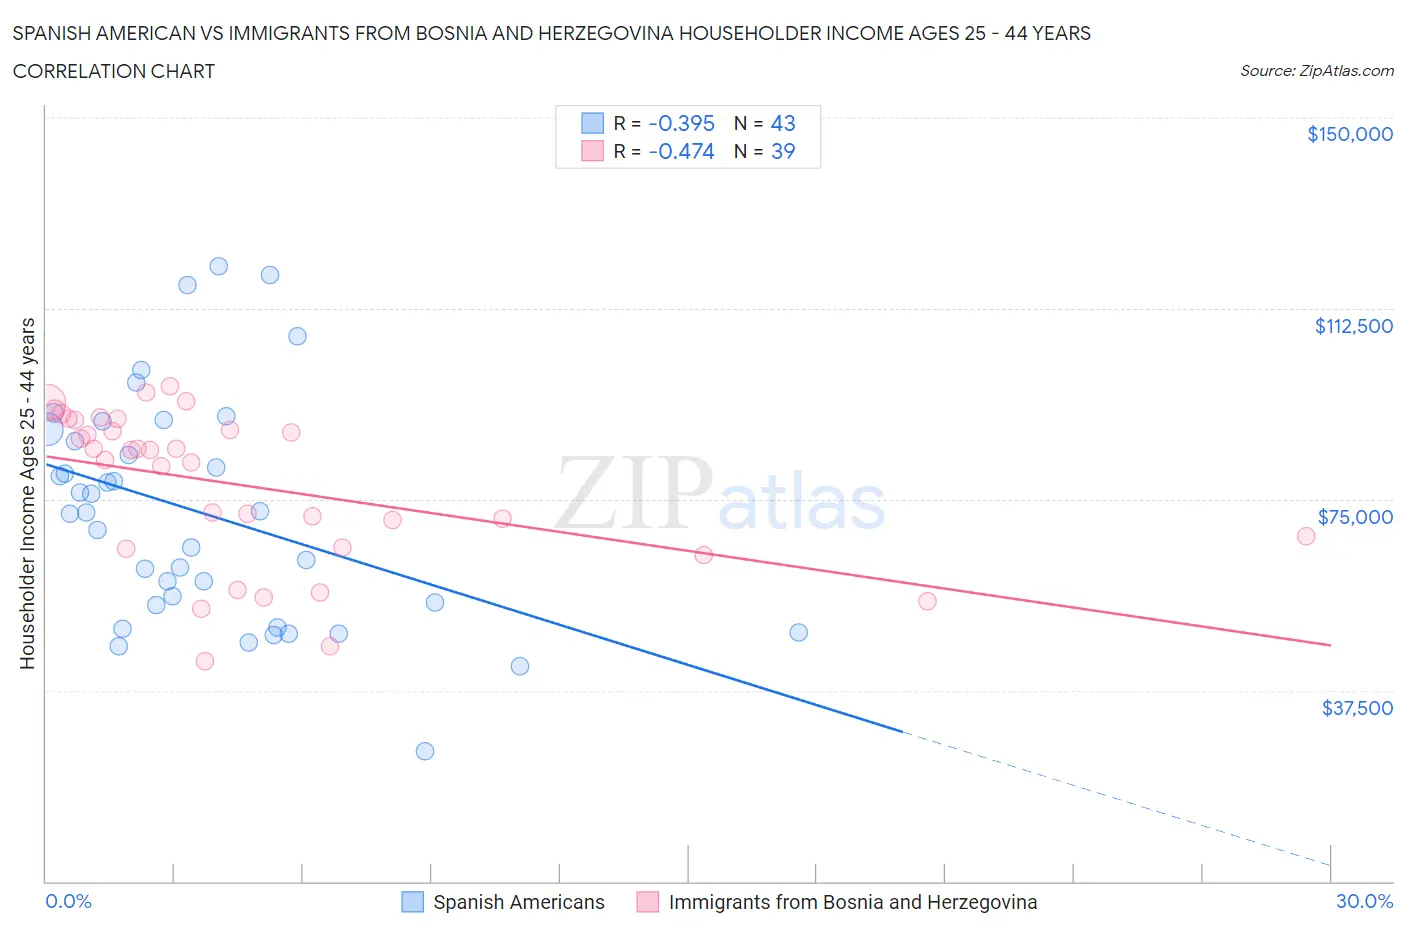 Spanish American vs Immigrants from Bosnia and Herzegovina Householder Income Ages 25 - 44 years